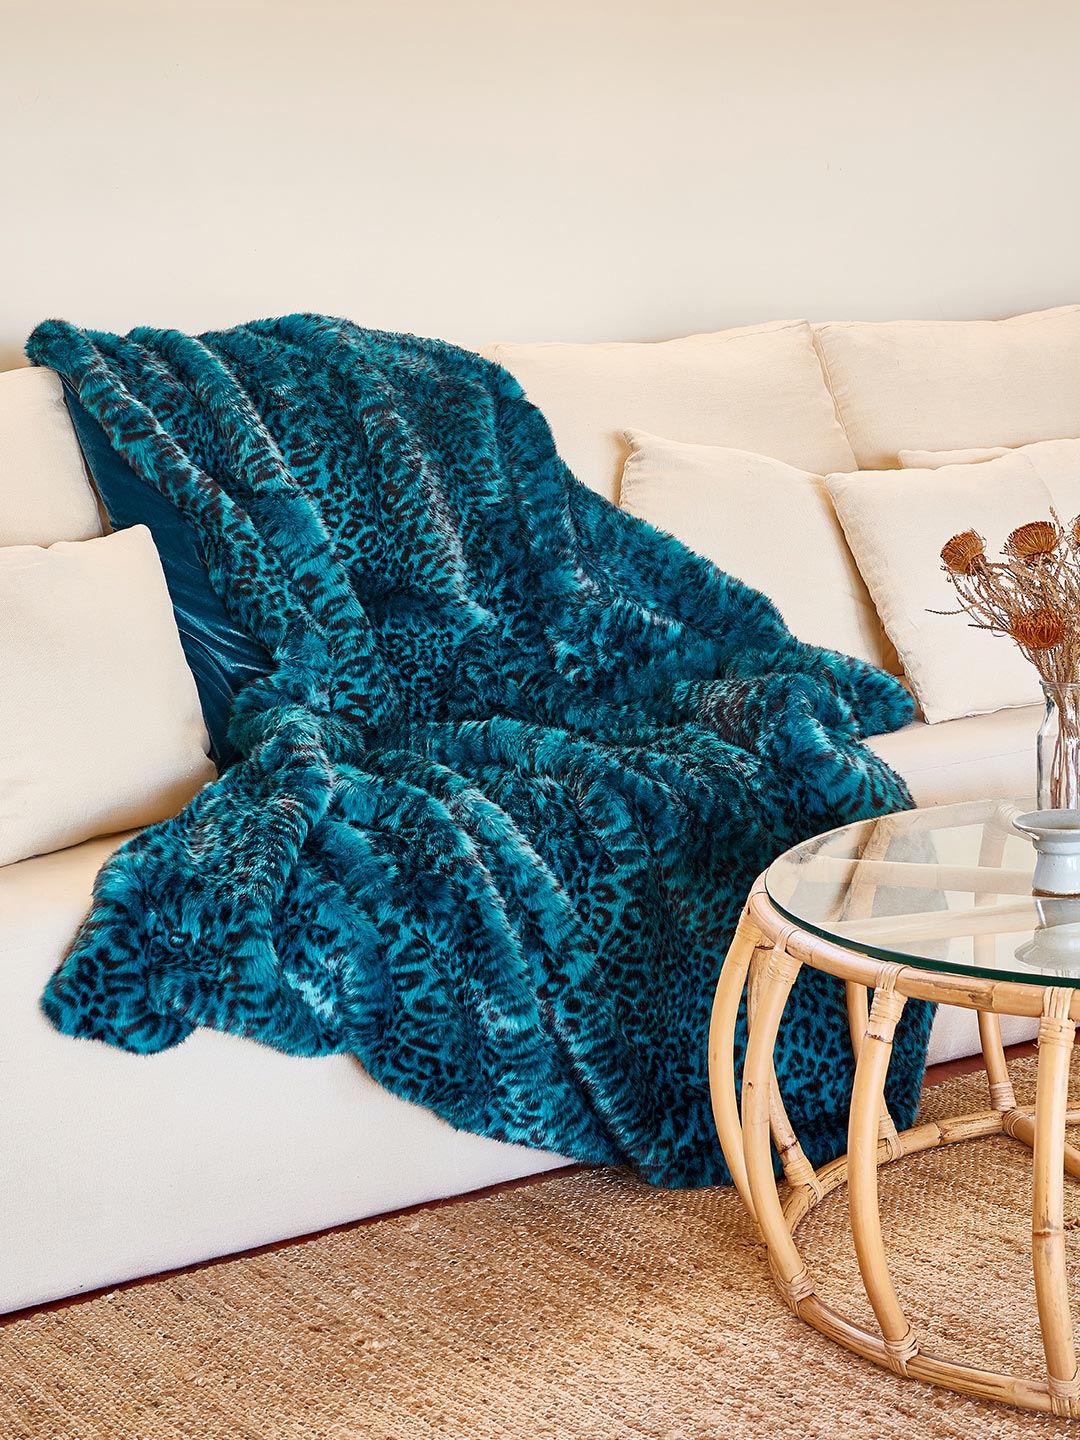 Ice Leopard Luxe Faux Fur Throw on Couch